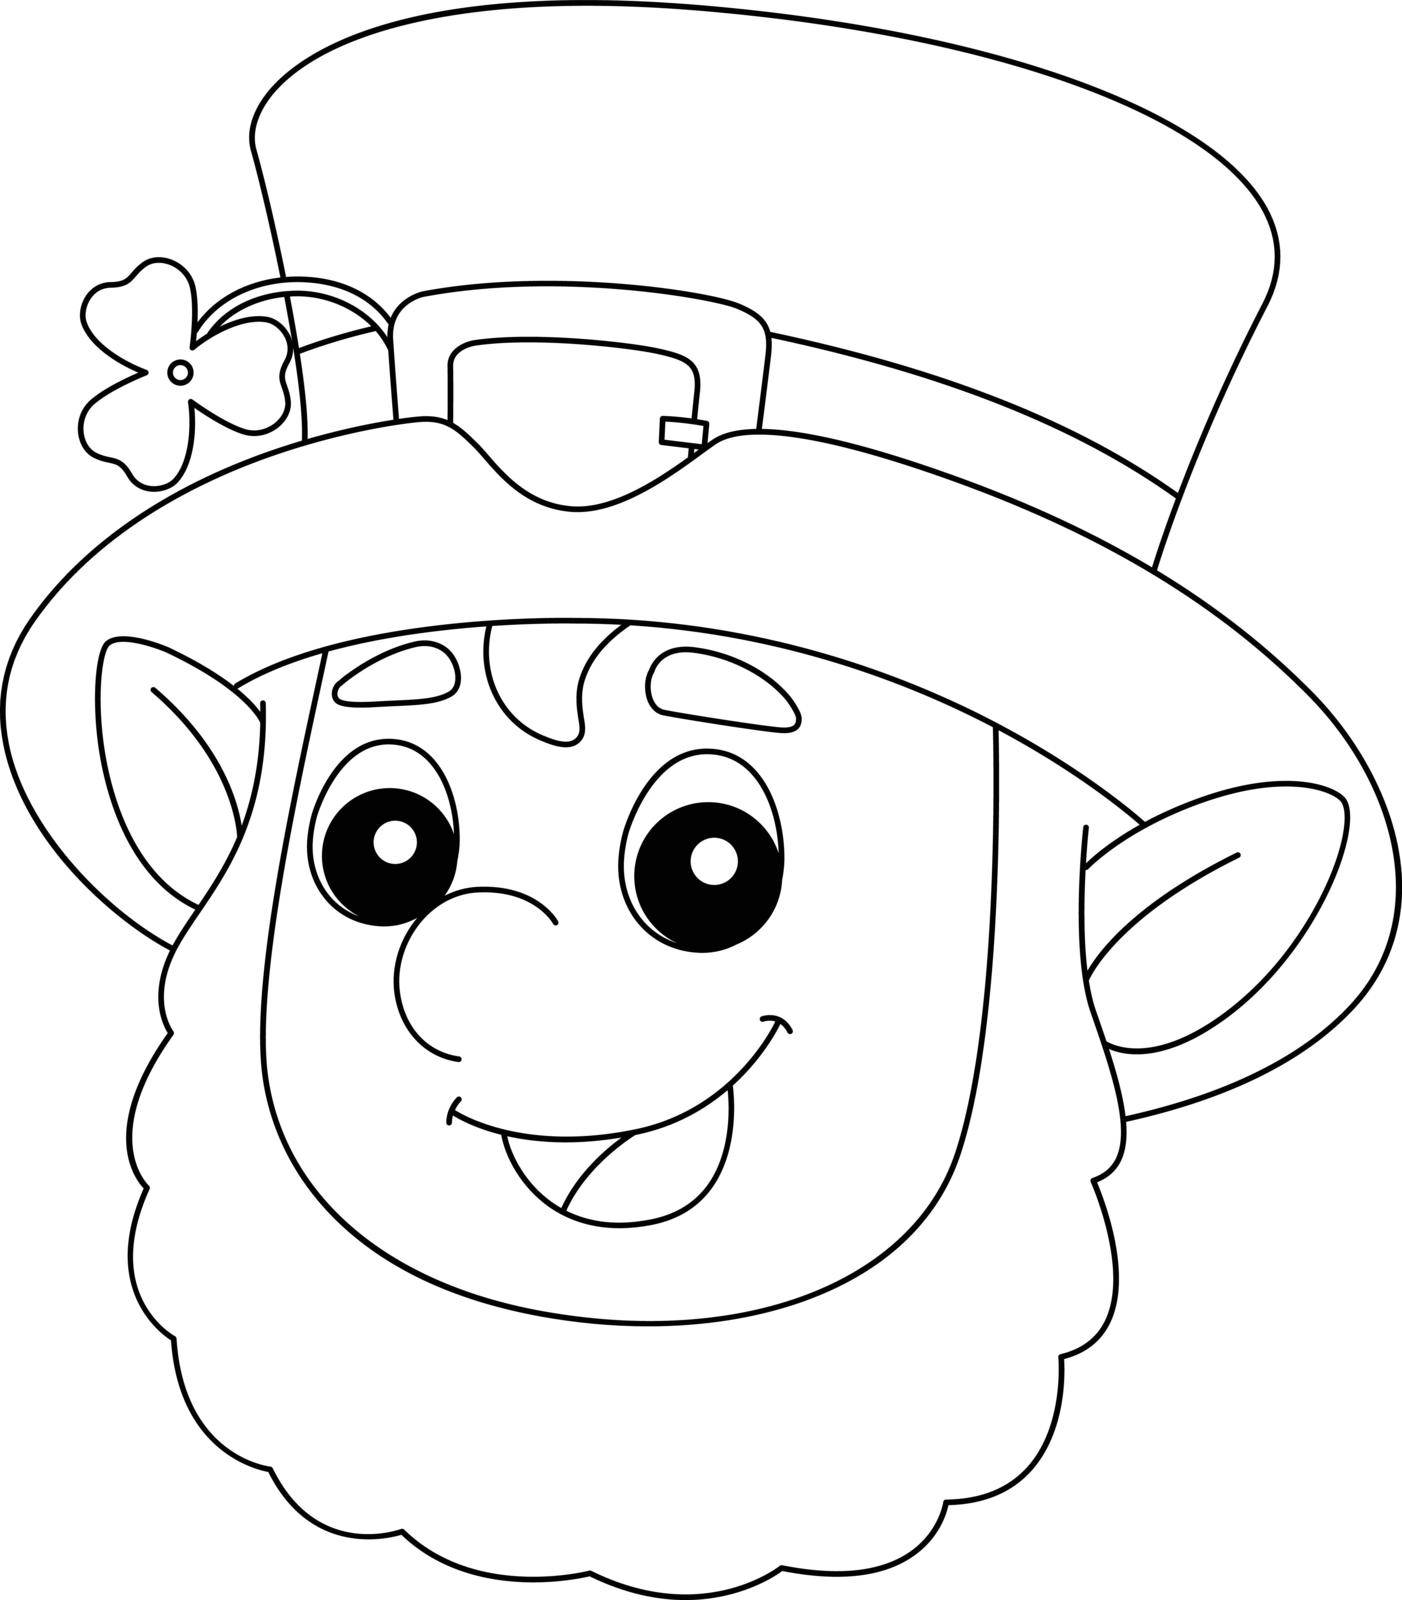 St. Patricks Day Leprechaun Coloring Page for Kids by abbydesign